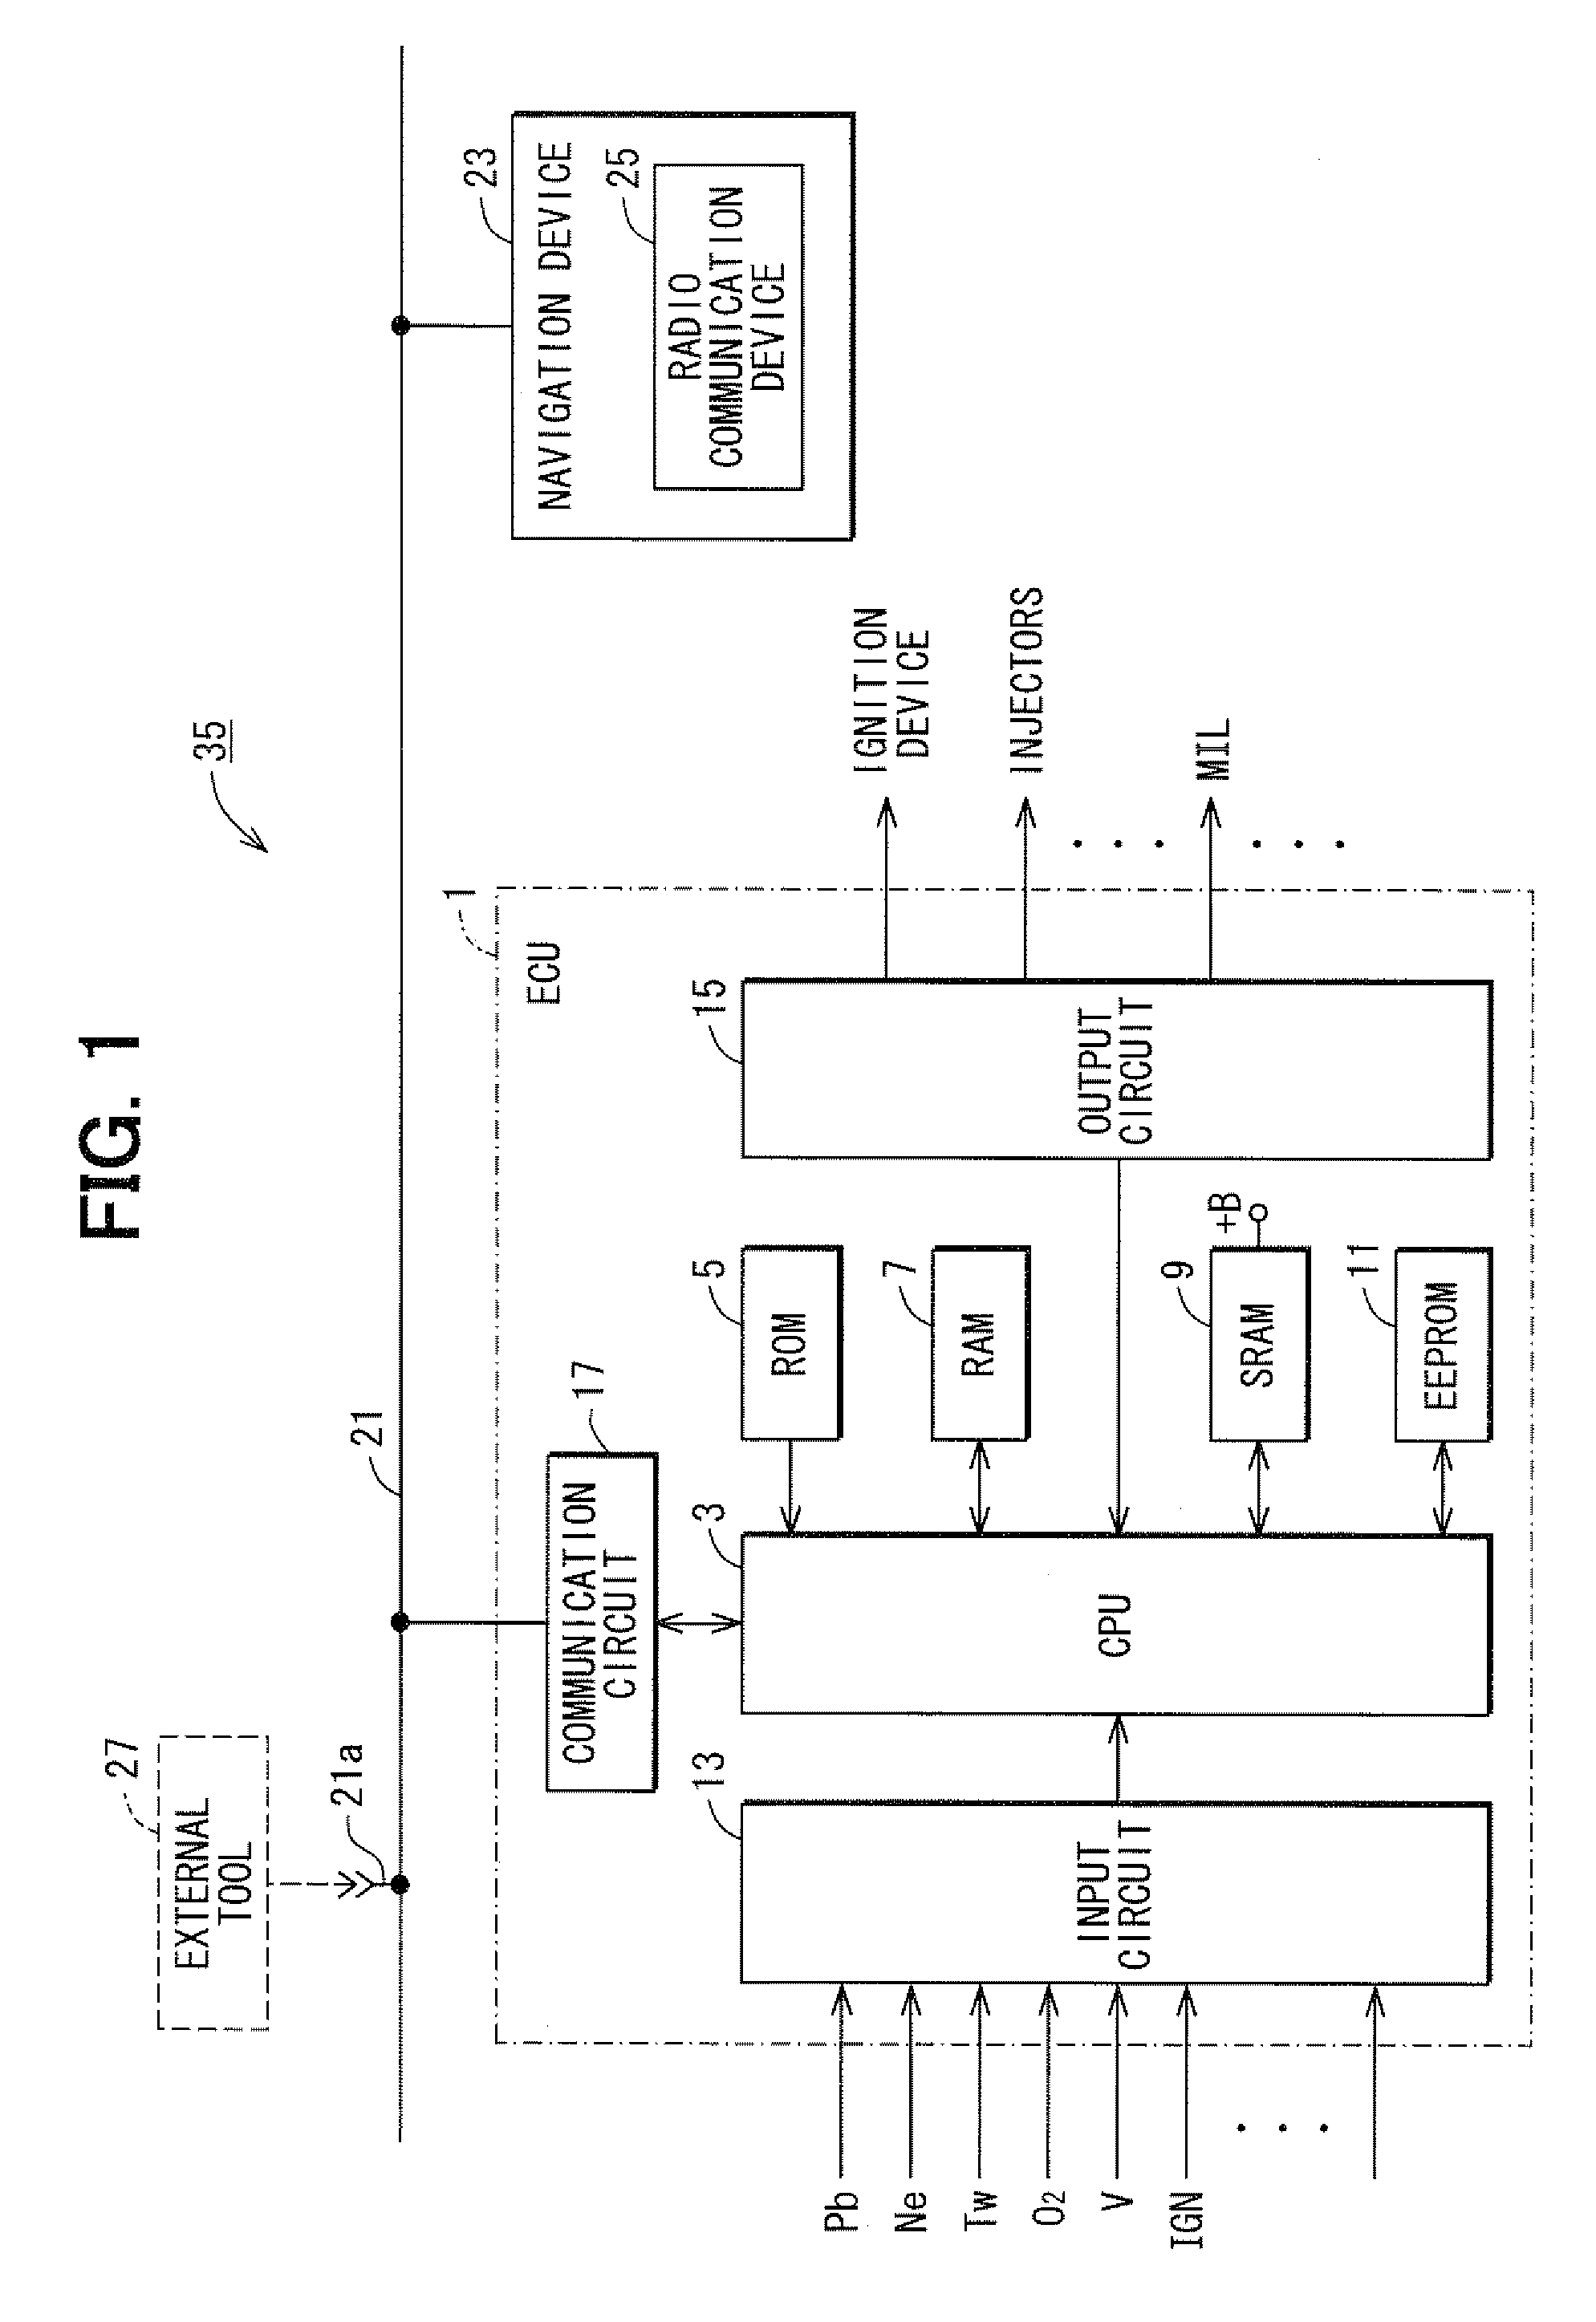 Electronic control system and method for vehicle diagnosis